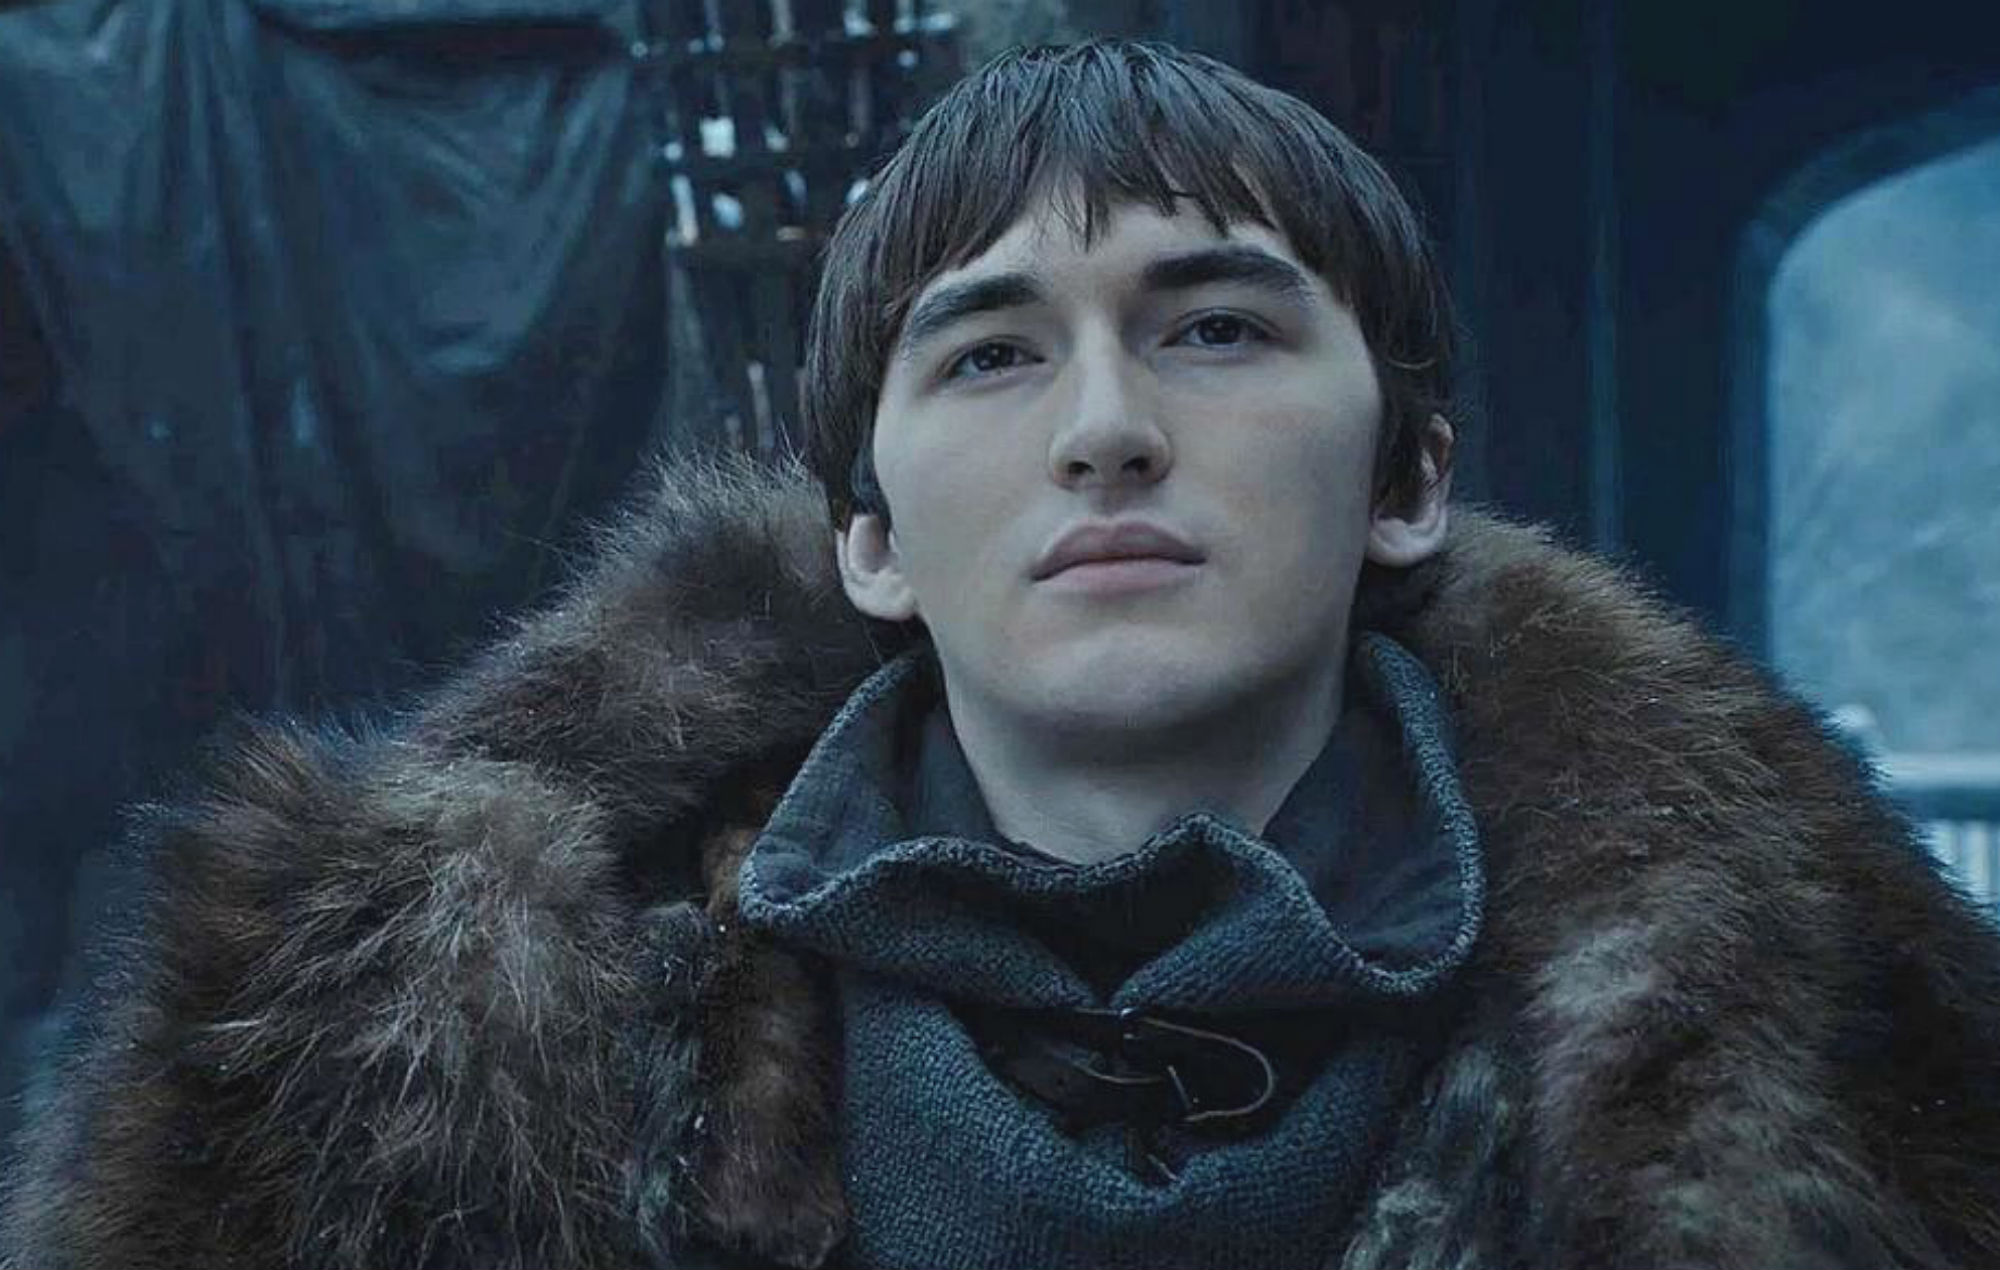 How Would You Die in “Game of Thrones”? bran stark game of thrones 2